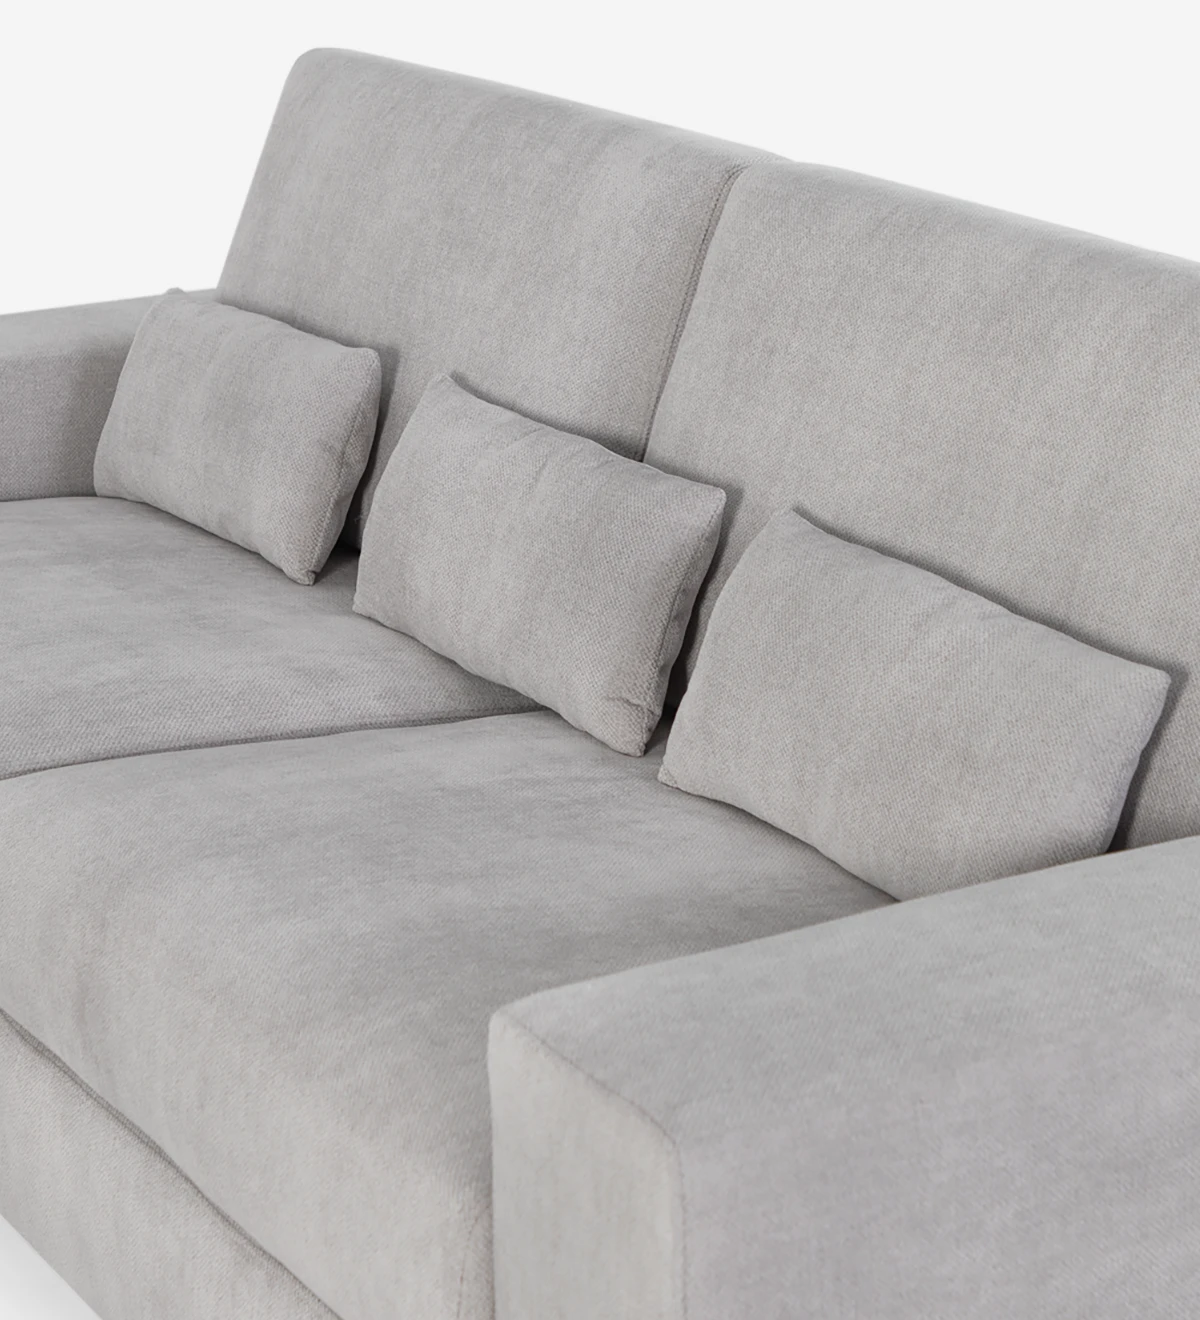 3 seater, upholstered in fabric.